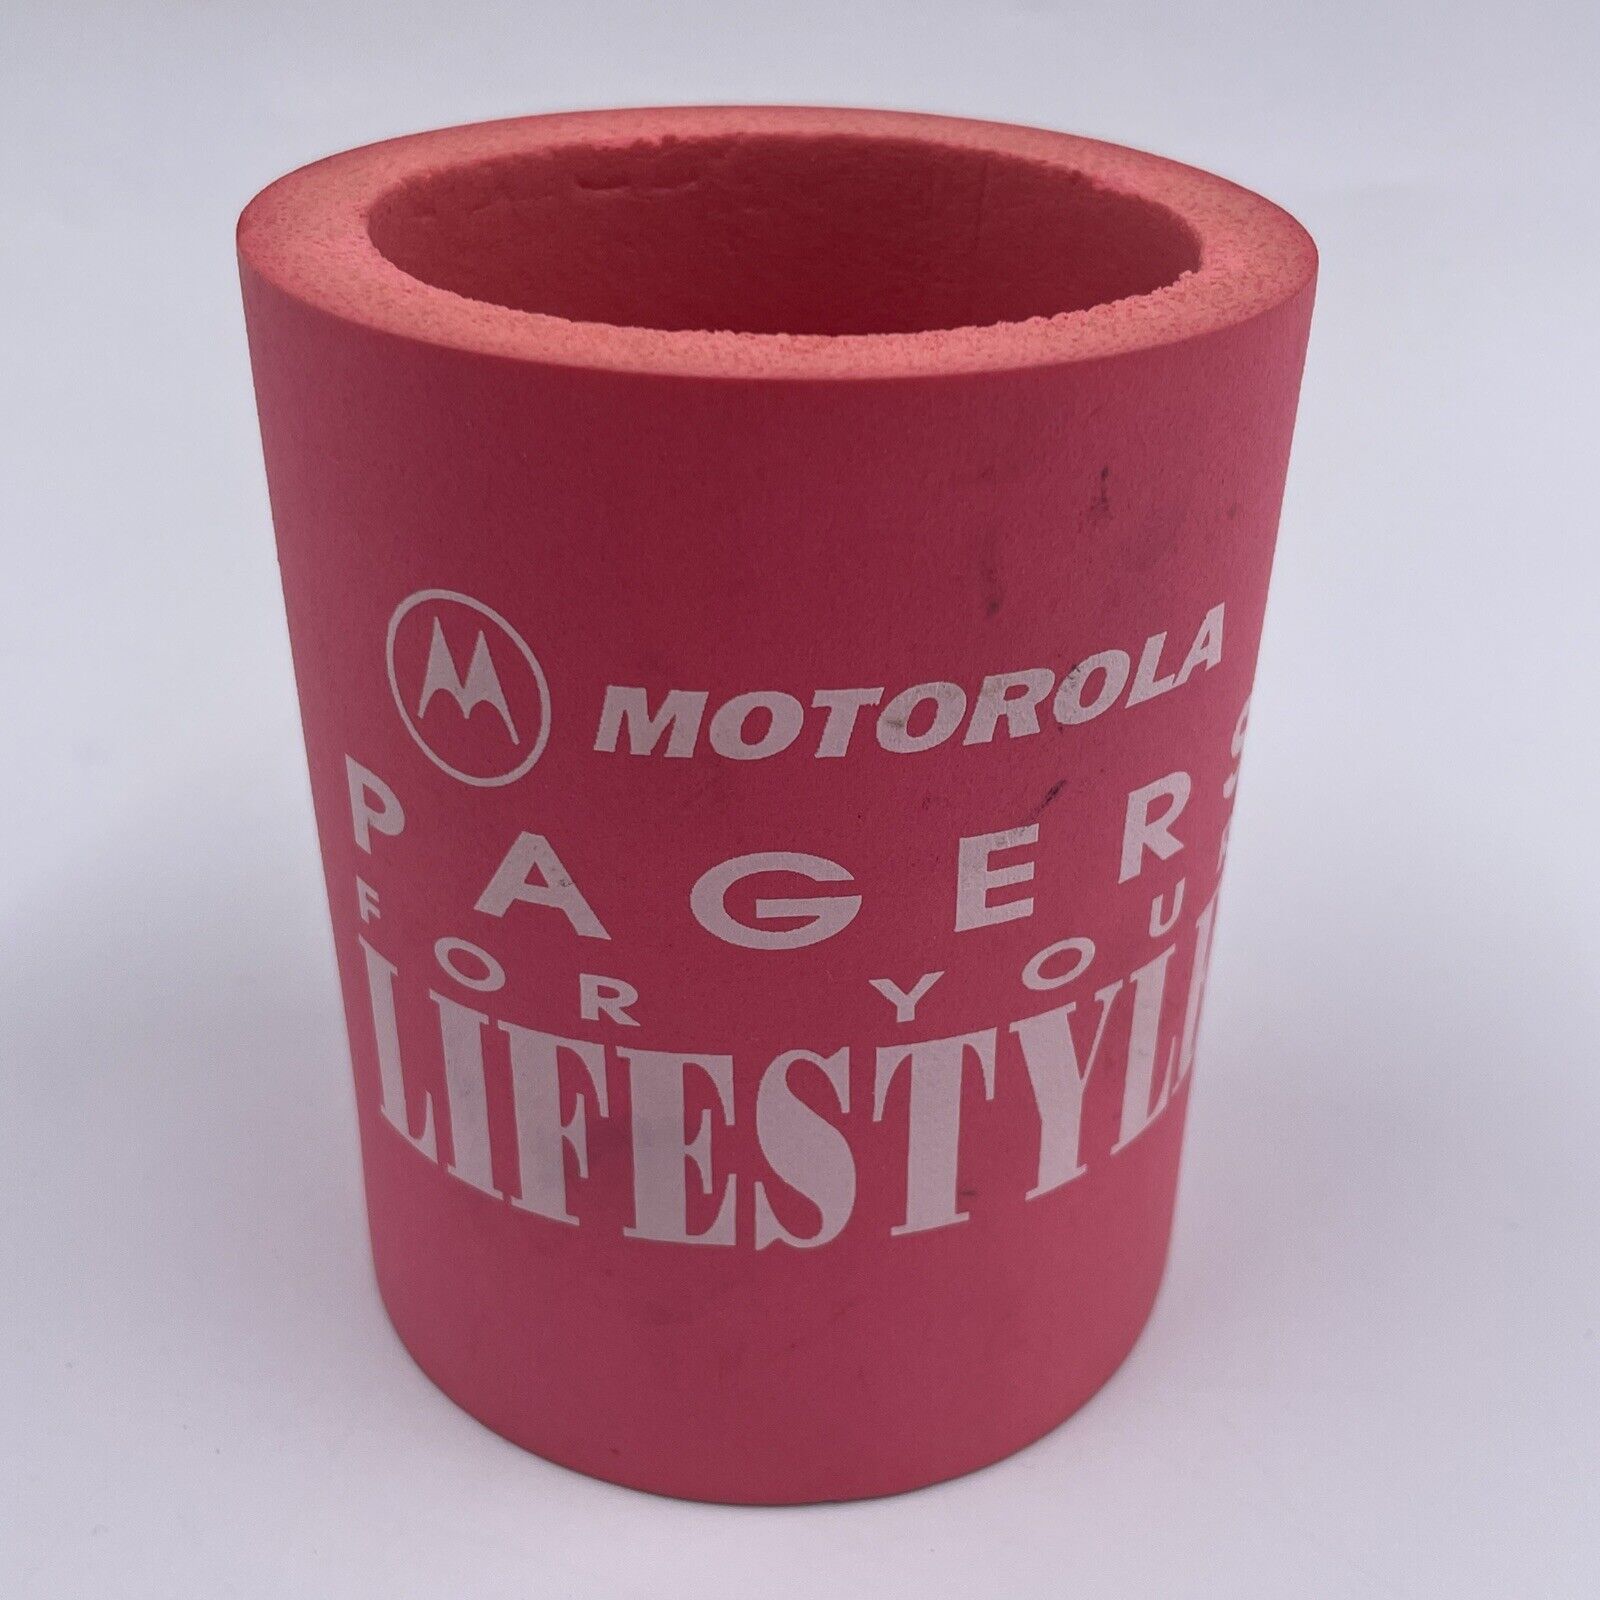 Motorola Pagers for Your Lifestyle Vintage Drink Coozie Beer Beverage Insulator